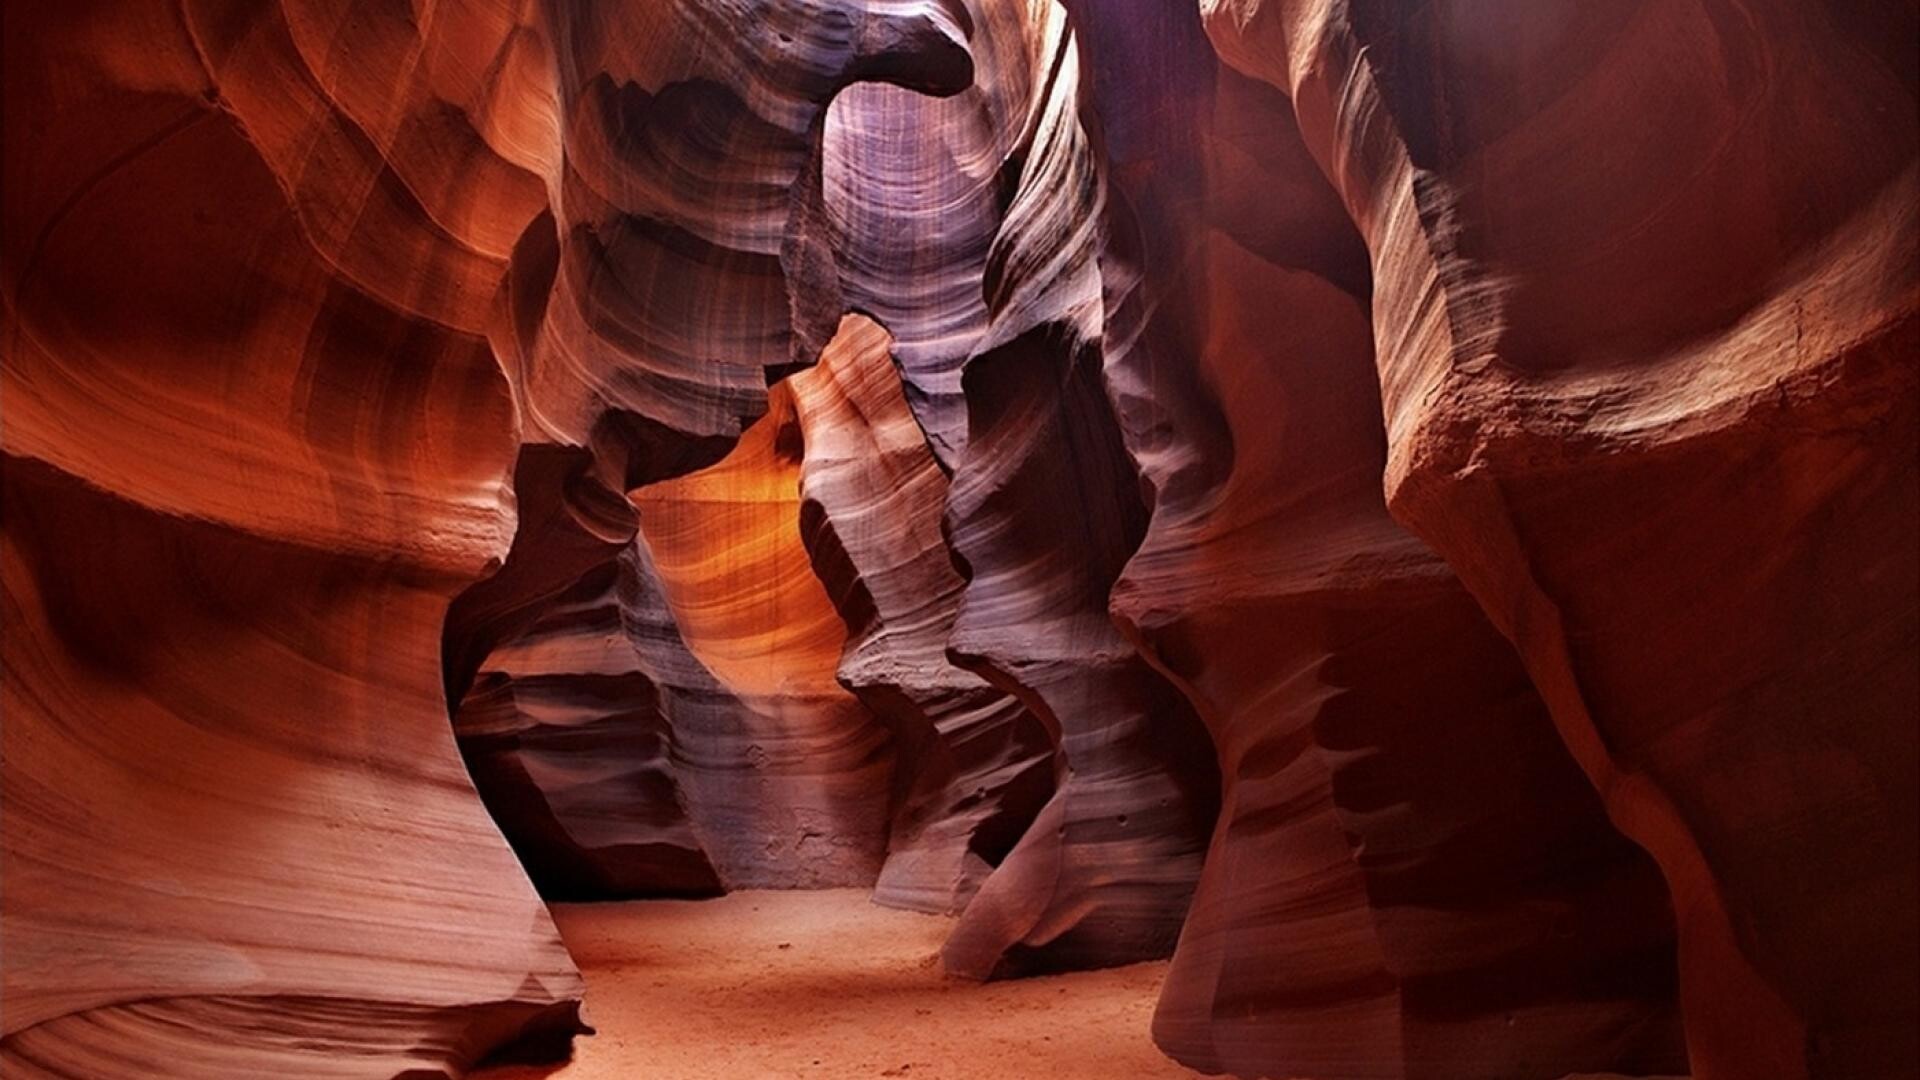 Geology: A deep cleft between escarpments or cliffs, Slot canyon, Rock formation. 1920x1080 Full HD Background.